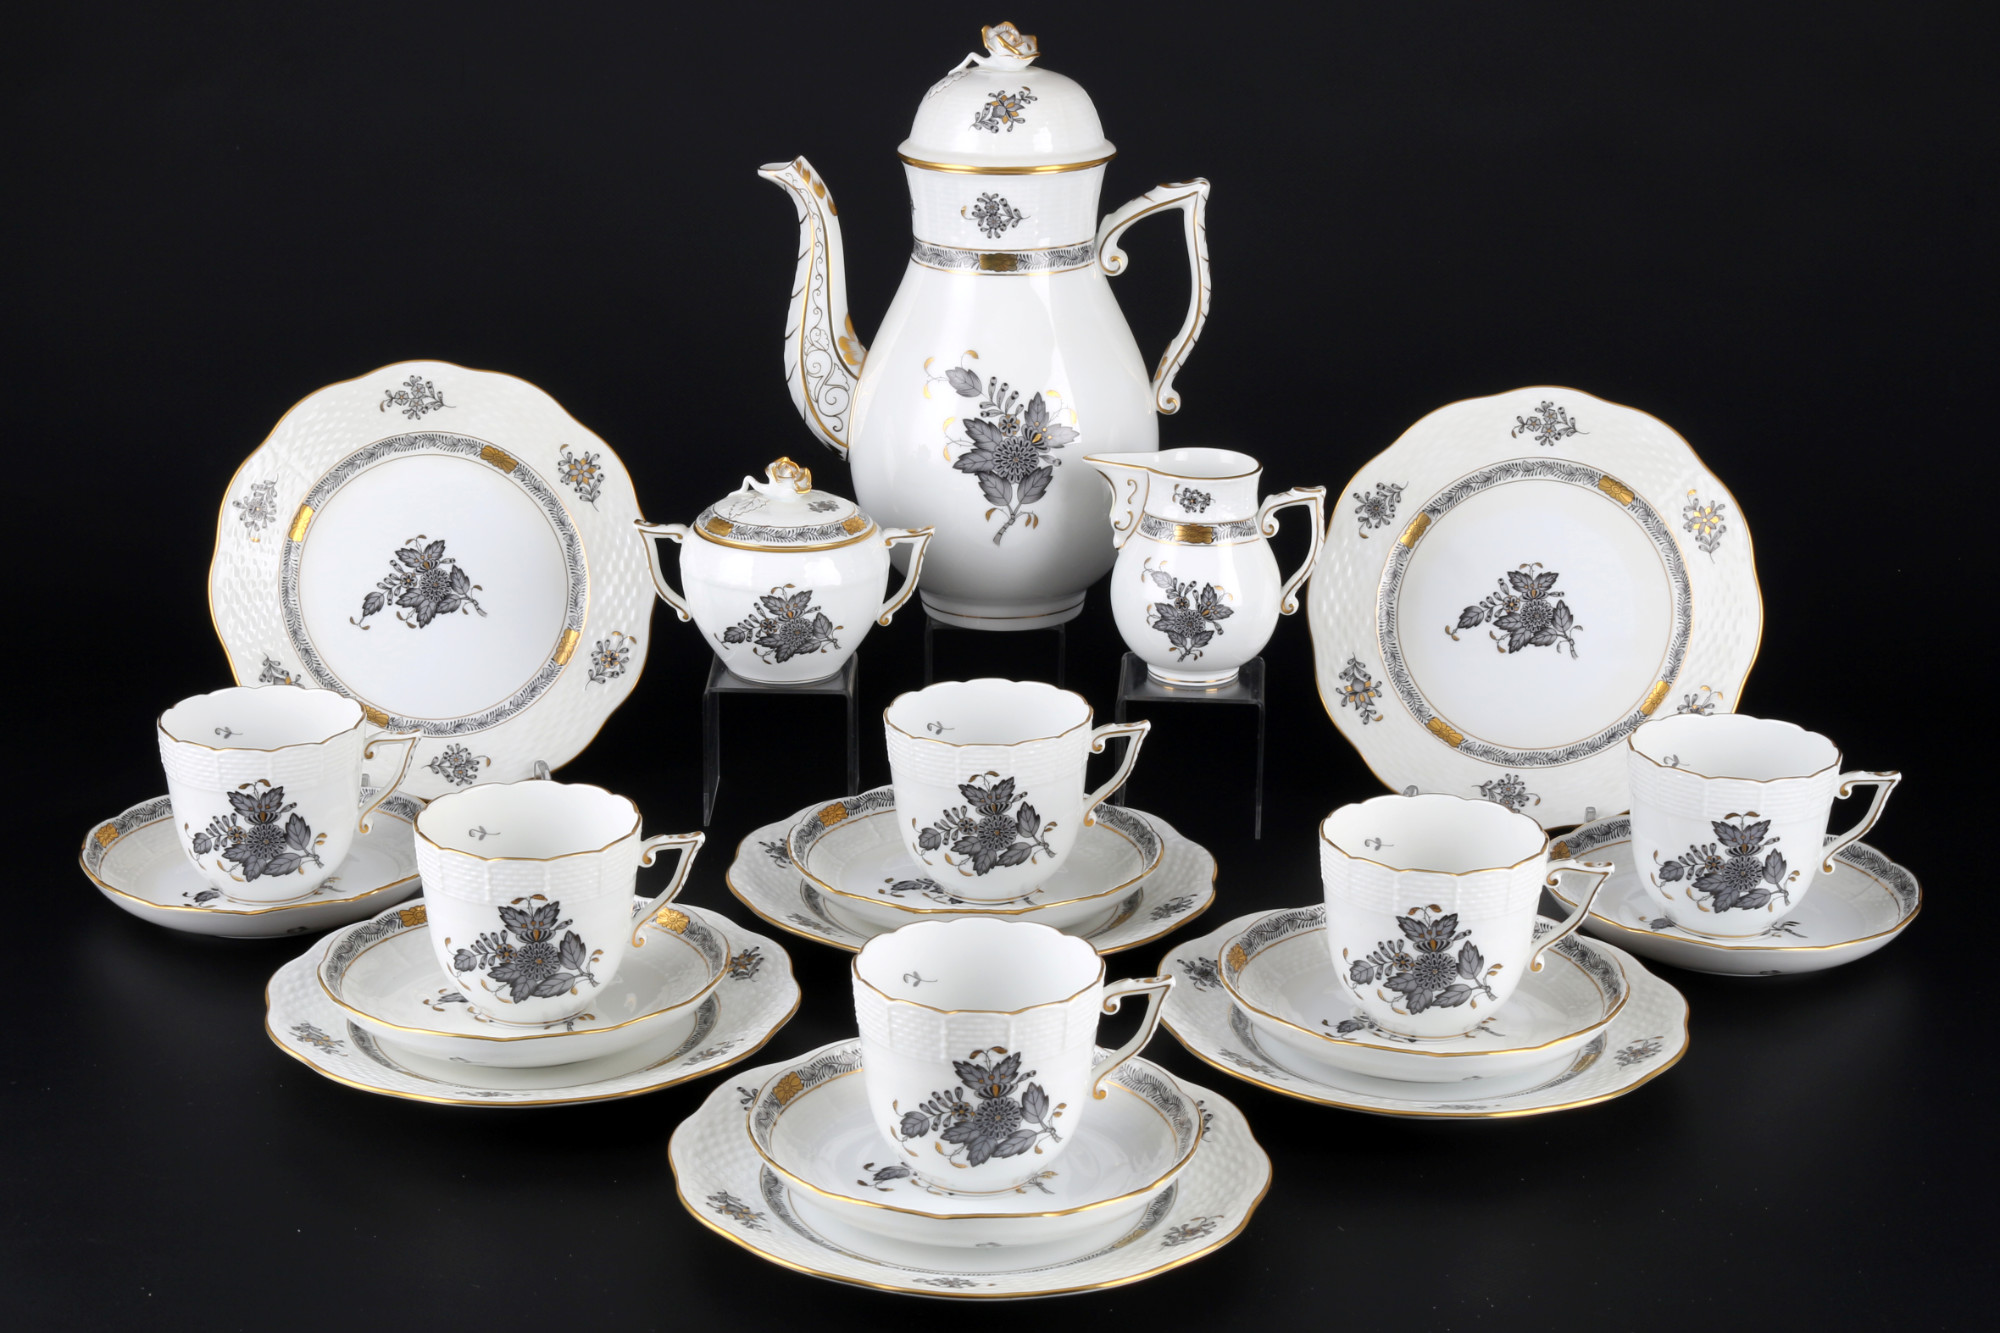 Herend Apponyi Grey coffee service for 6 persons, Kaffeeservice für 6 Personen,